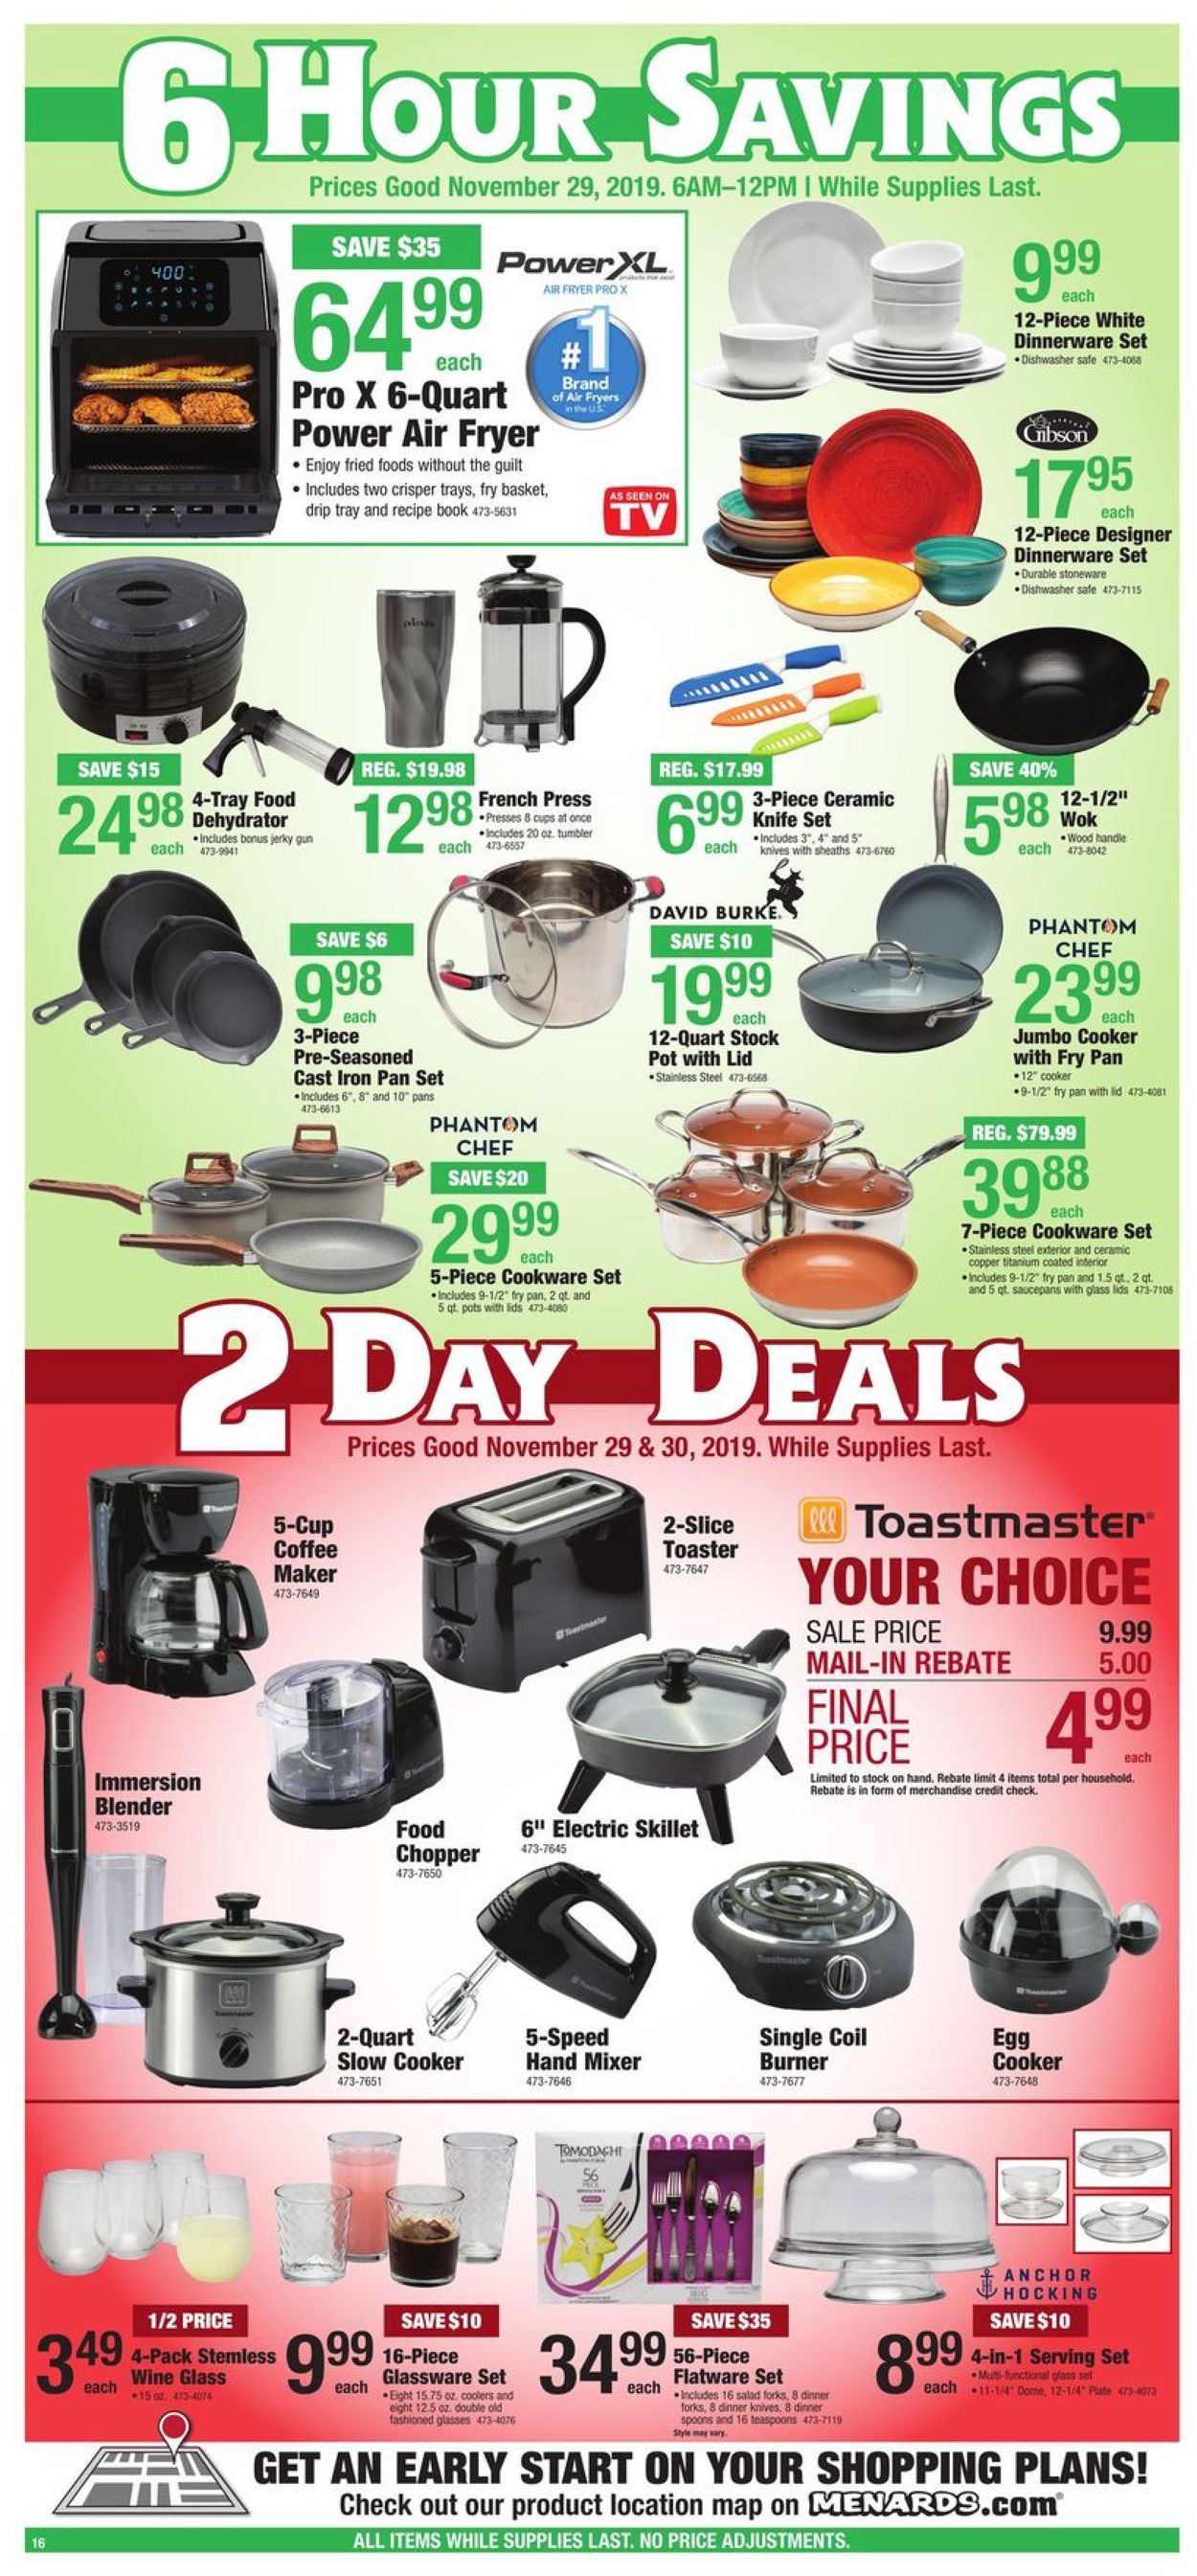 Menards - Black Friday Sale 2019 Current weekly ad 11/29 - 11/30/2019 [17] - 0